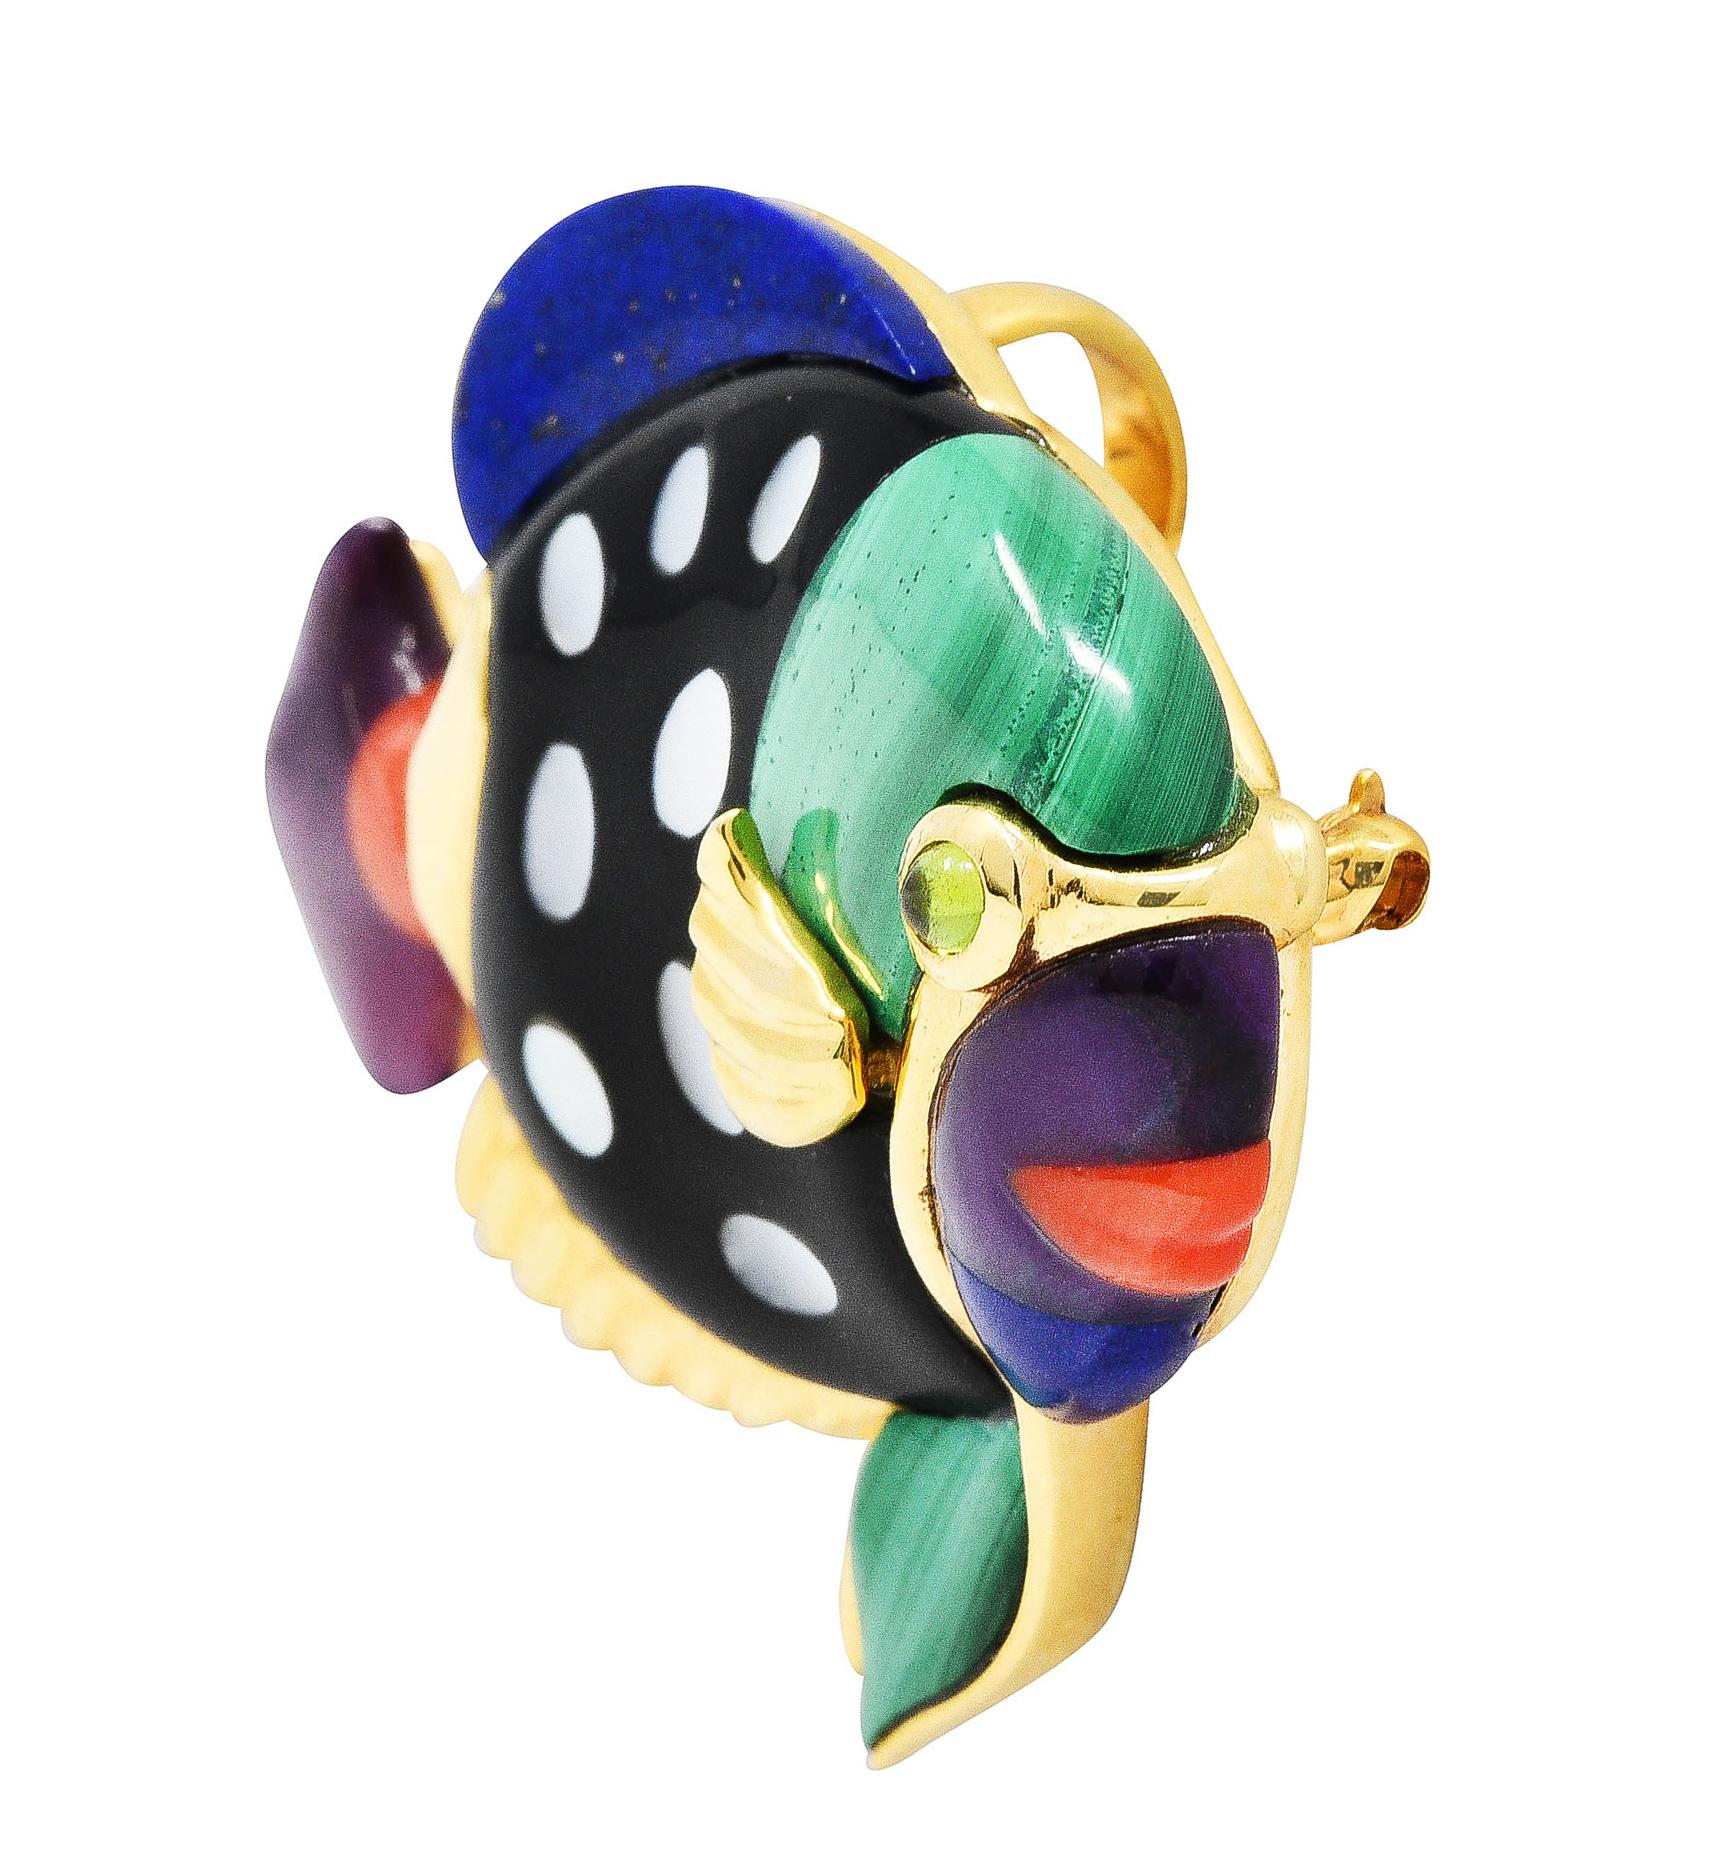 Pendant brooch designed as stylized fish with high polished ridged gold fins

Featuring lapis lazuli, coral, amethyst, onyx, malachite, and mother-of-pearl - flushly inlaid

With a bezel set 2.5 mm round peridot cabochon eye

Completed by pin stem